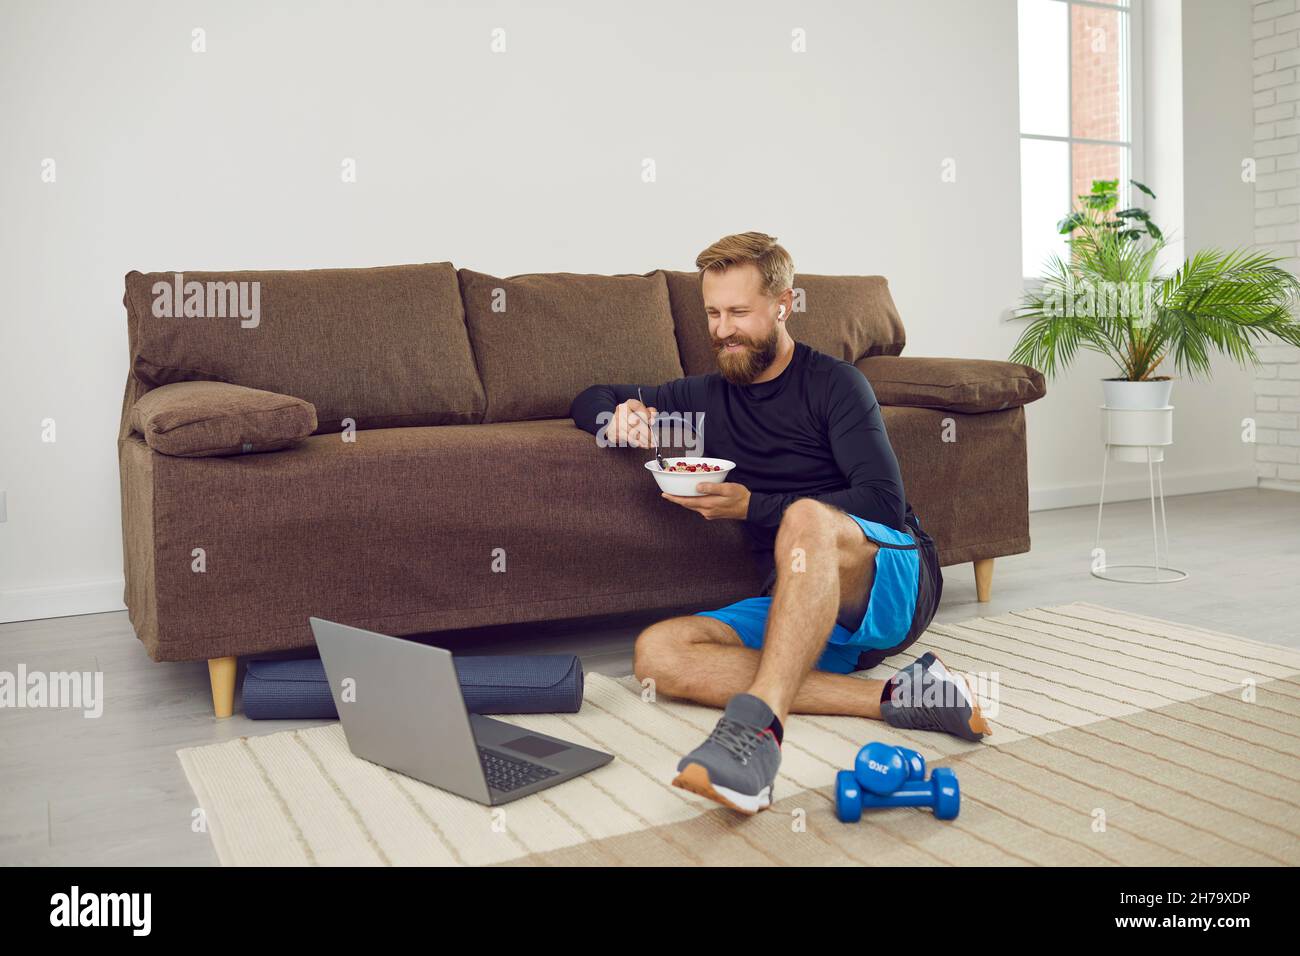 Man having break during fitness workout at home, eating healthy food and using laptop Stock Photo